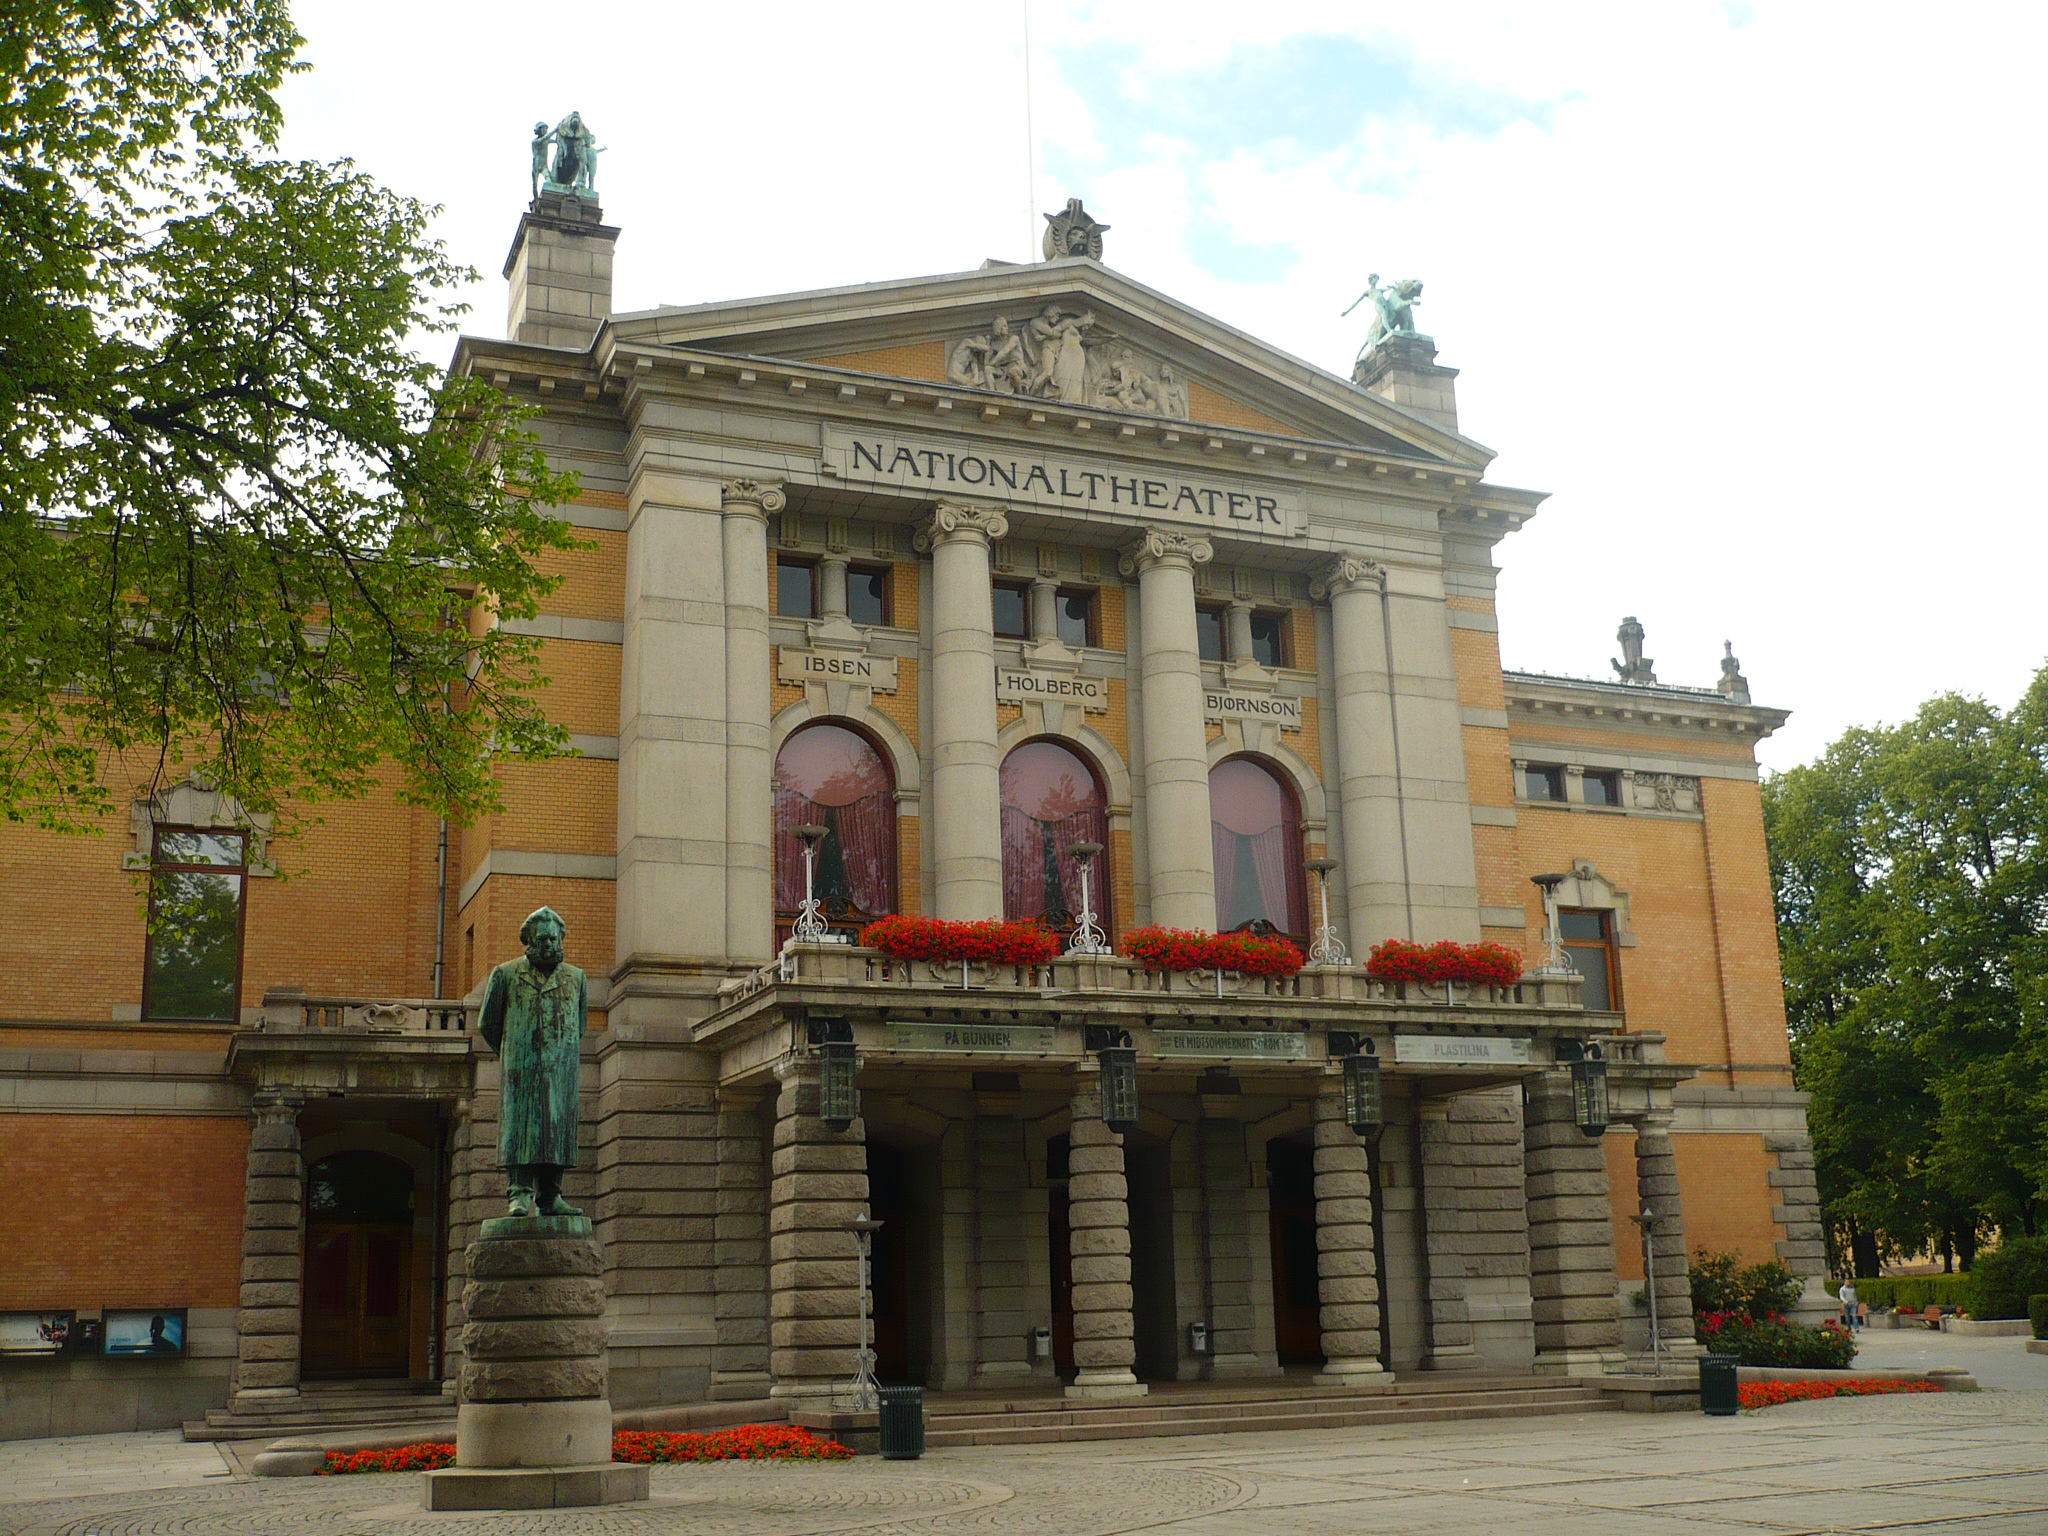 Oslo - National Theater